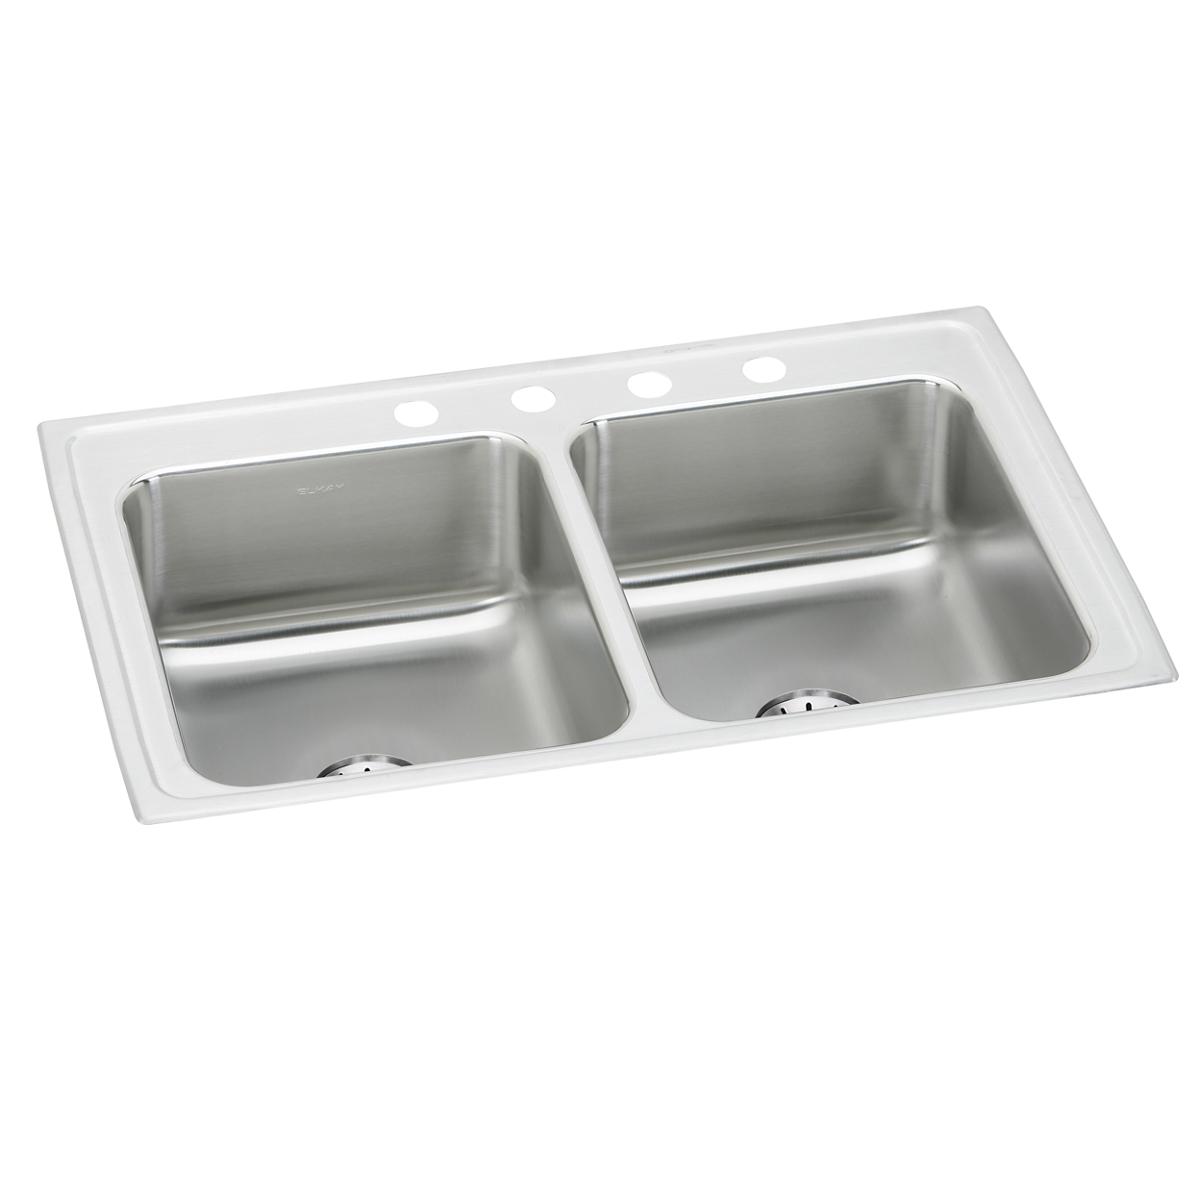 Elkay Lustertone Classic 33" x 21-1/4" x 7-7/8" Equal Double Bowl Drop-in Sink w/ Perfect Drain